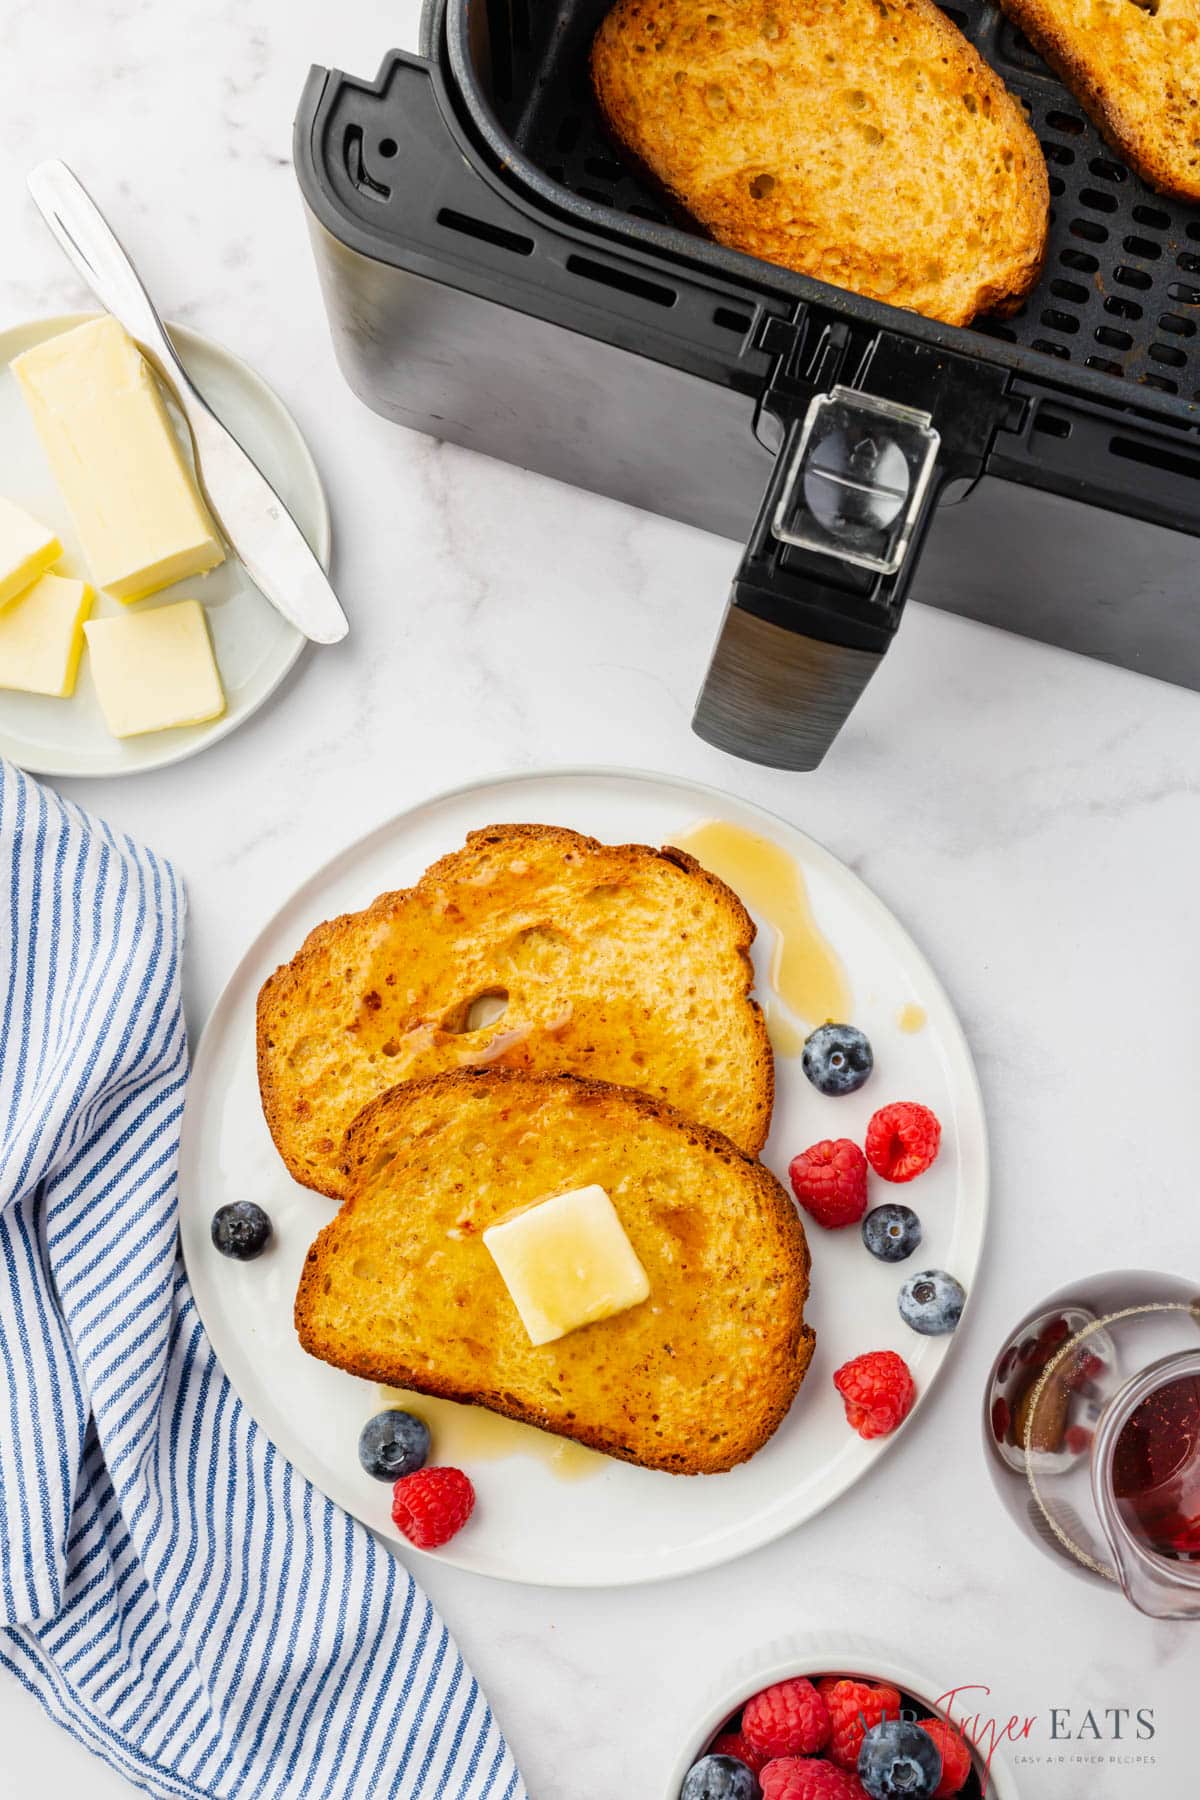 a plate of french toast and berries next to an air fryer basket